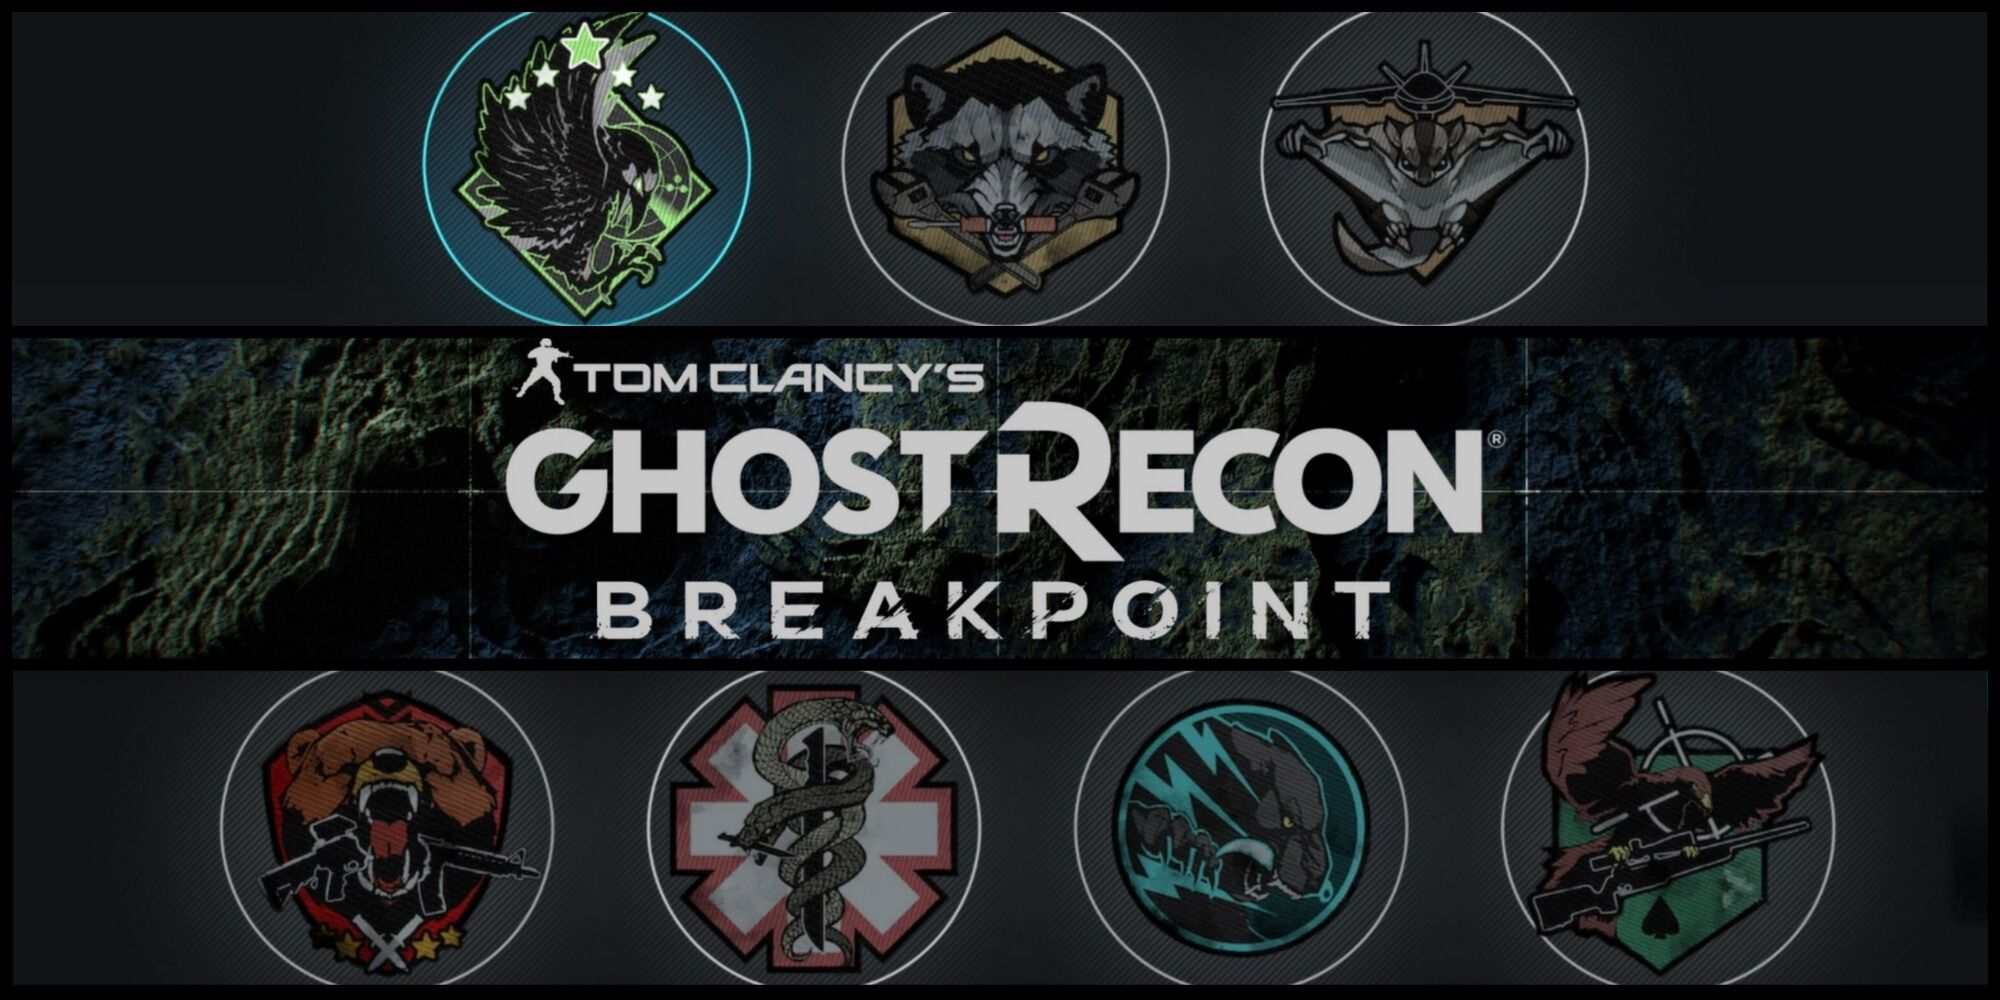 The Ghost Recon Breakpoint title with the 7 logos of the different character classes